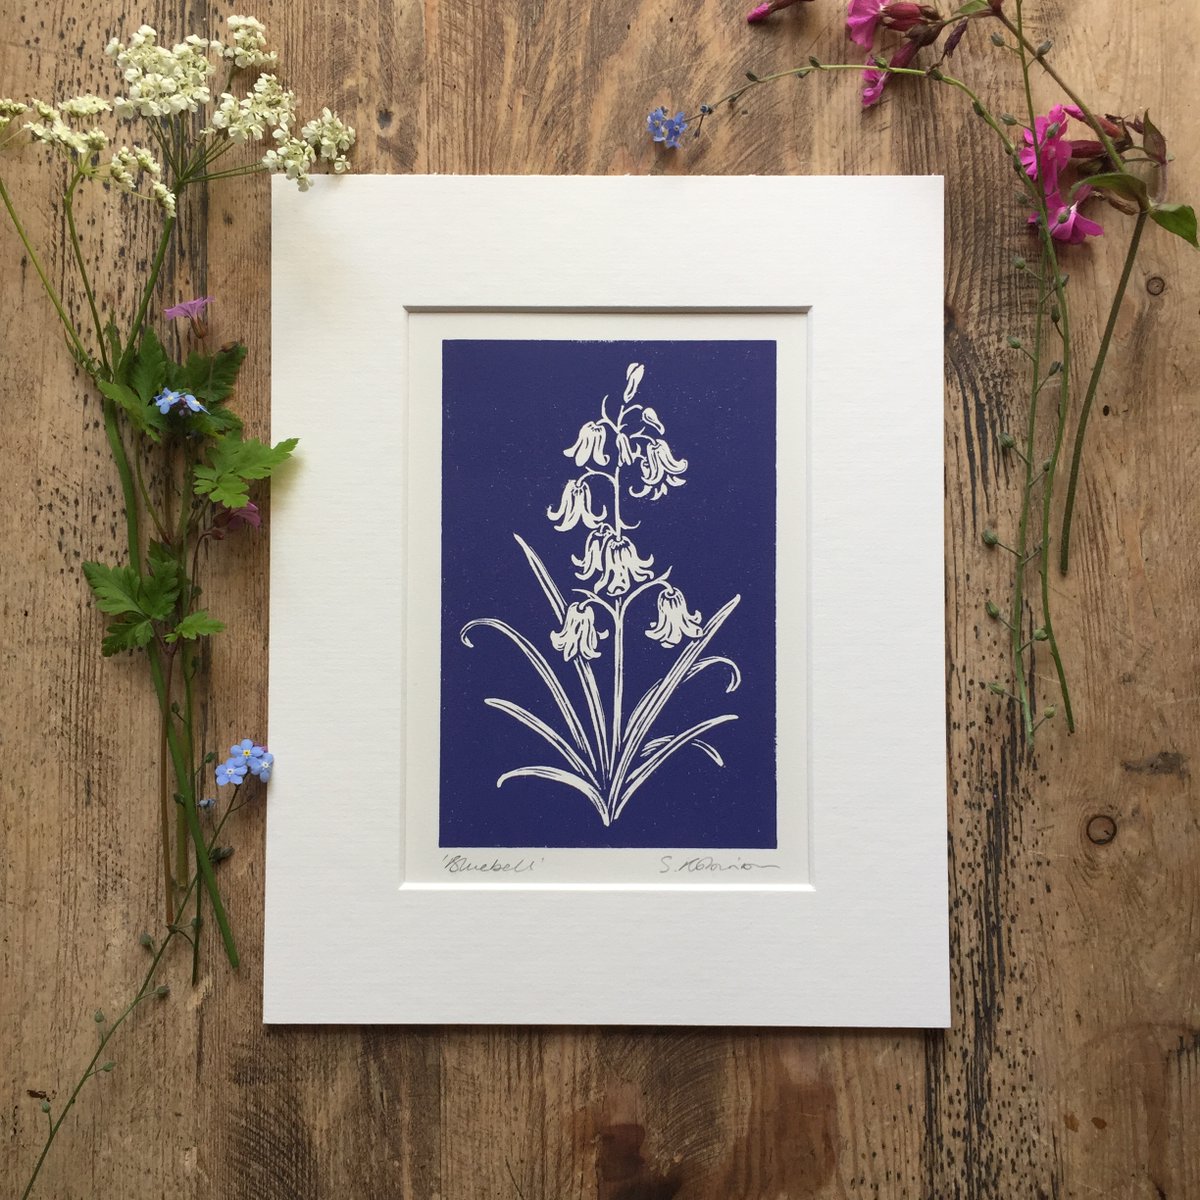 I've listed one of my 'Bluebell' linocuts on Etsy. It's printed by hand and makes a really special gift for a nature lover 💚 #bluebells #linocut #handmade #giftideas #shopindie #EtsyHandmade sarahrobinsondesigns.etsy.com/listing/172028…